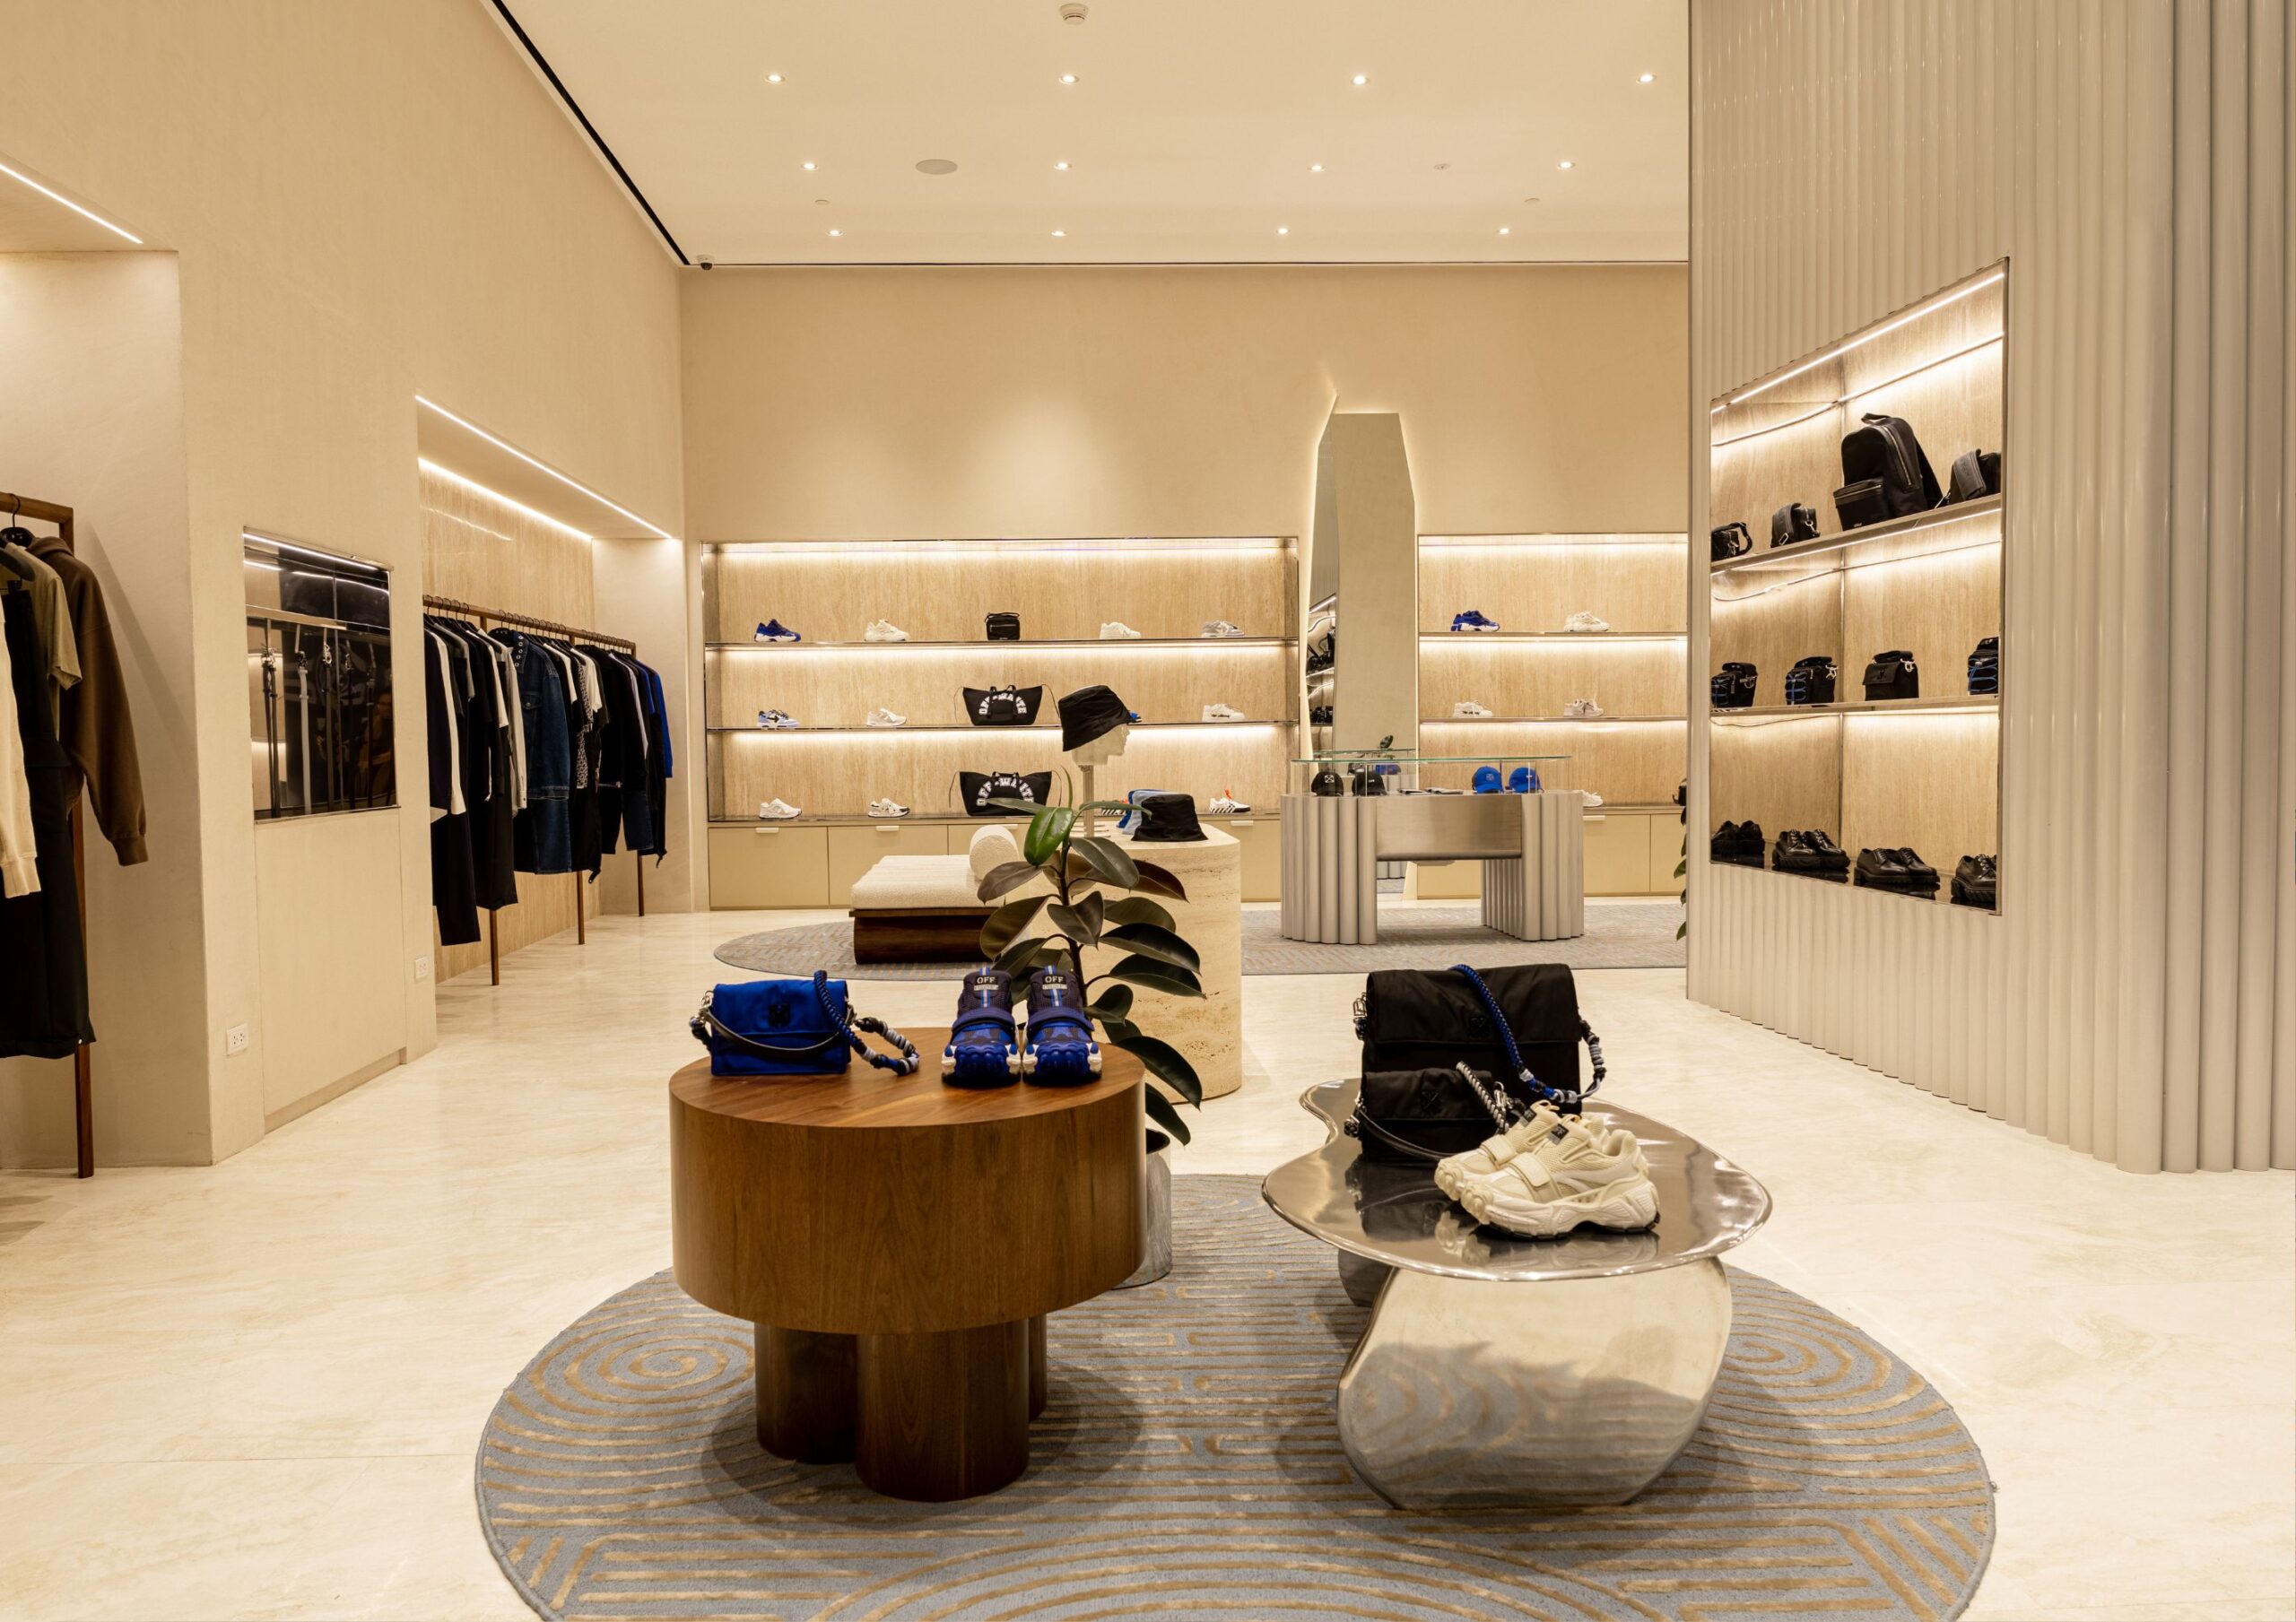 Interior of minimalist store with high end designer fashion items.